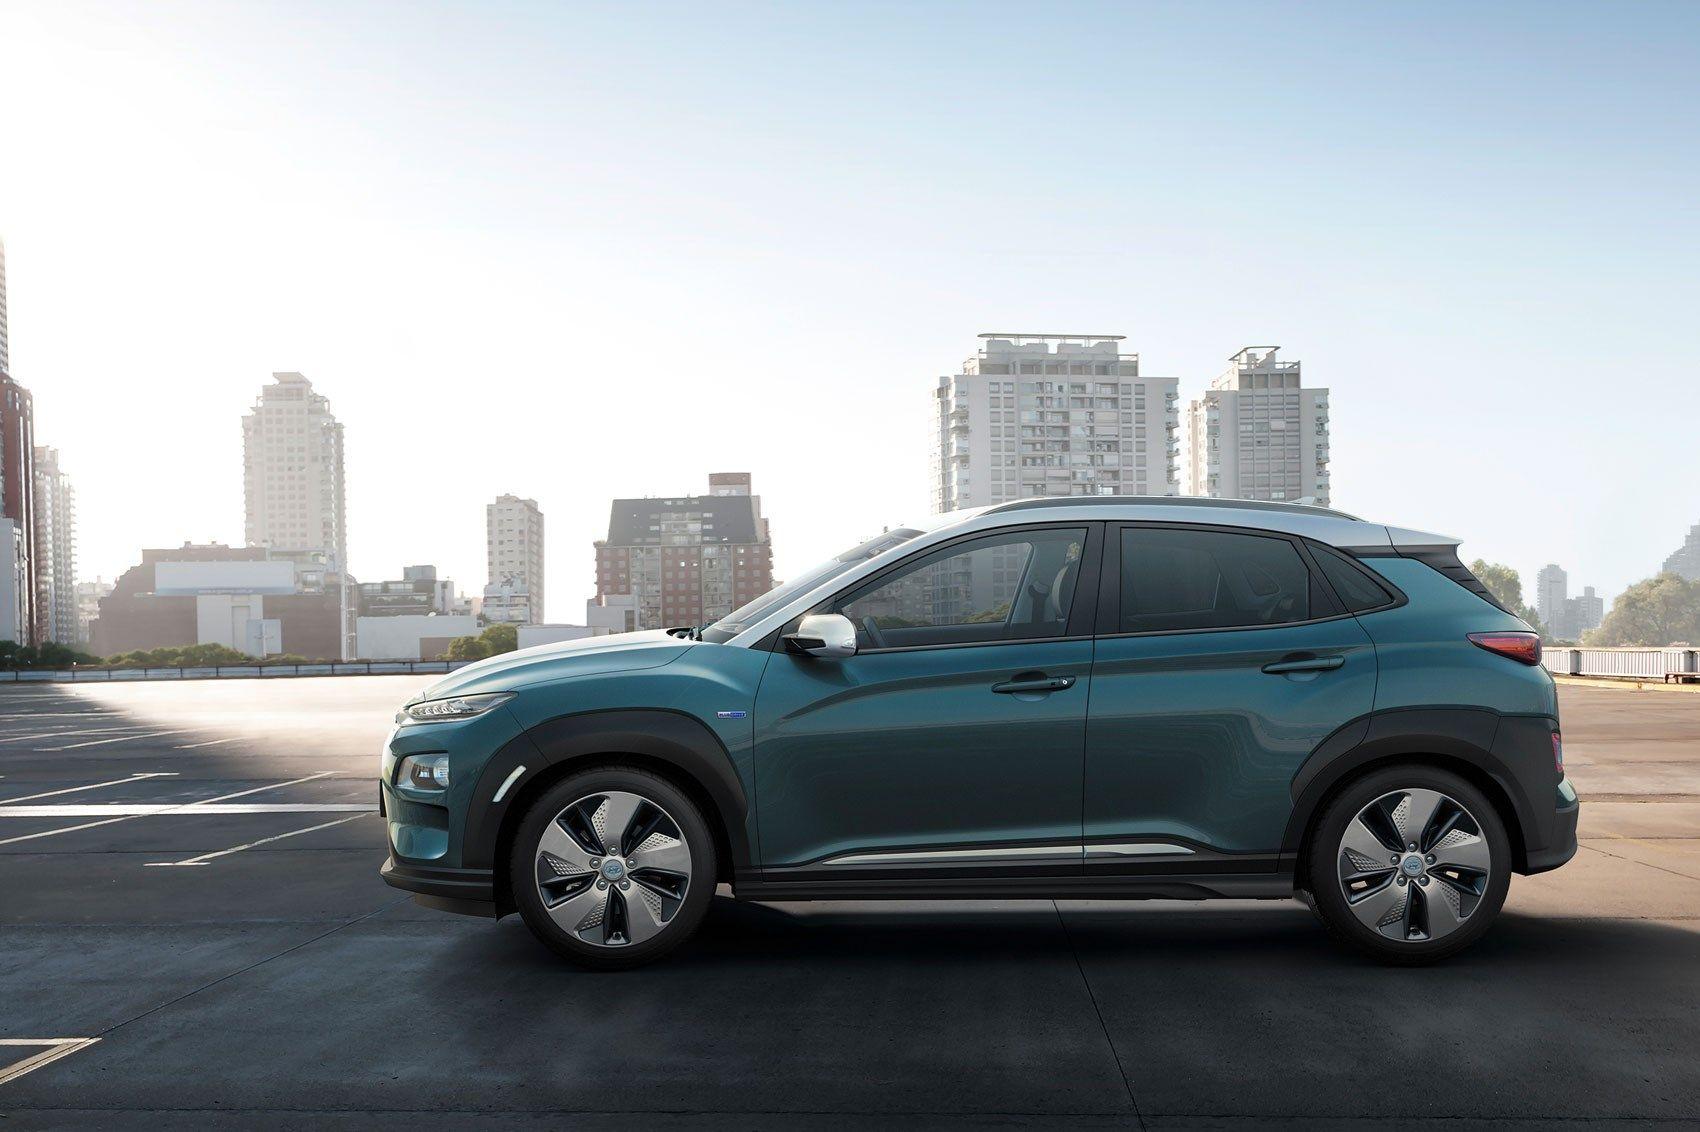 New Hyundai Kona SUV: specs, pics and details on Electric model